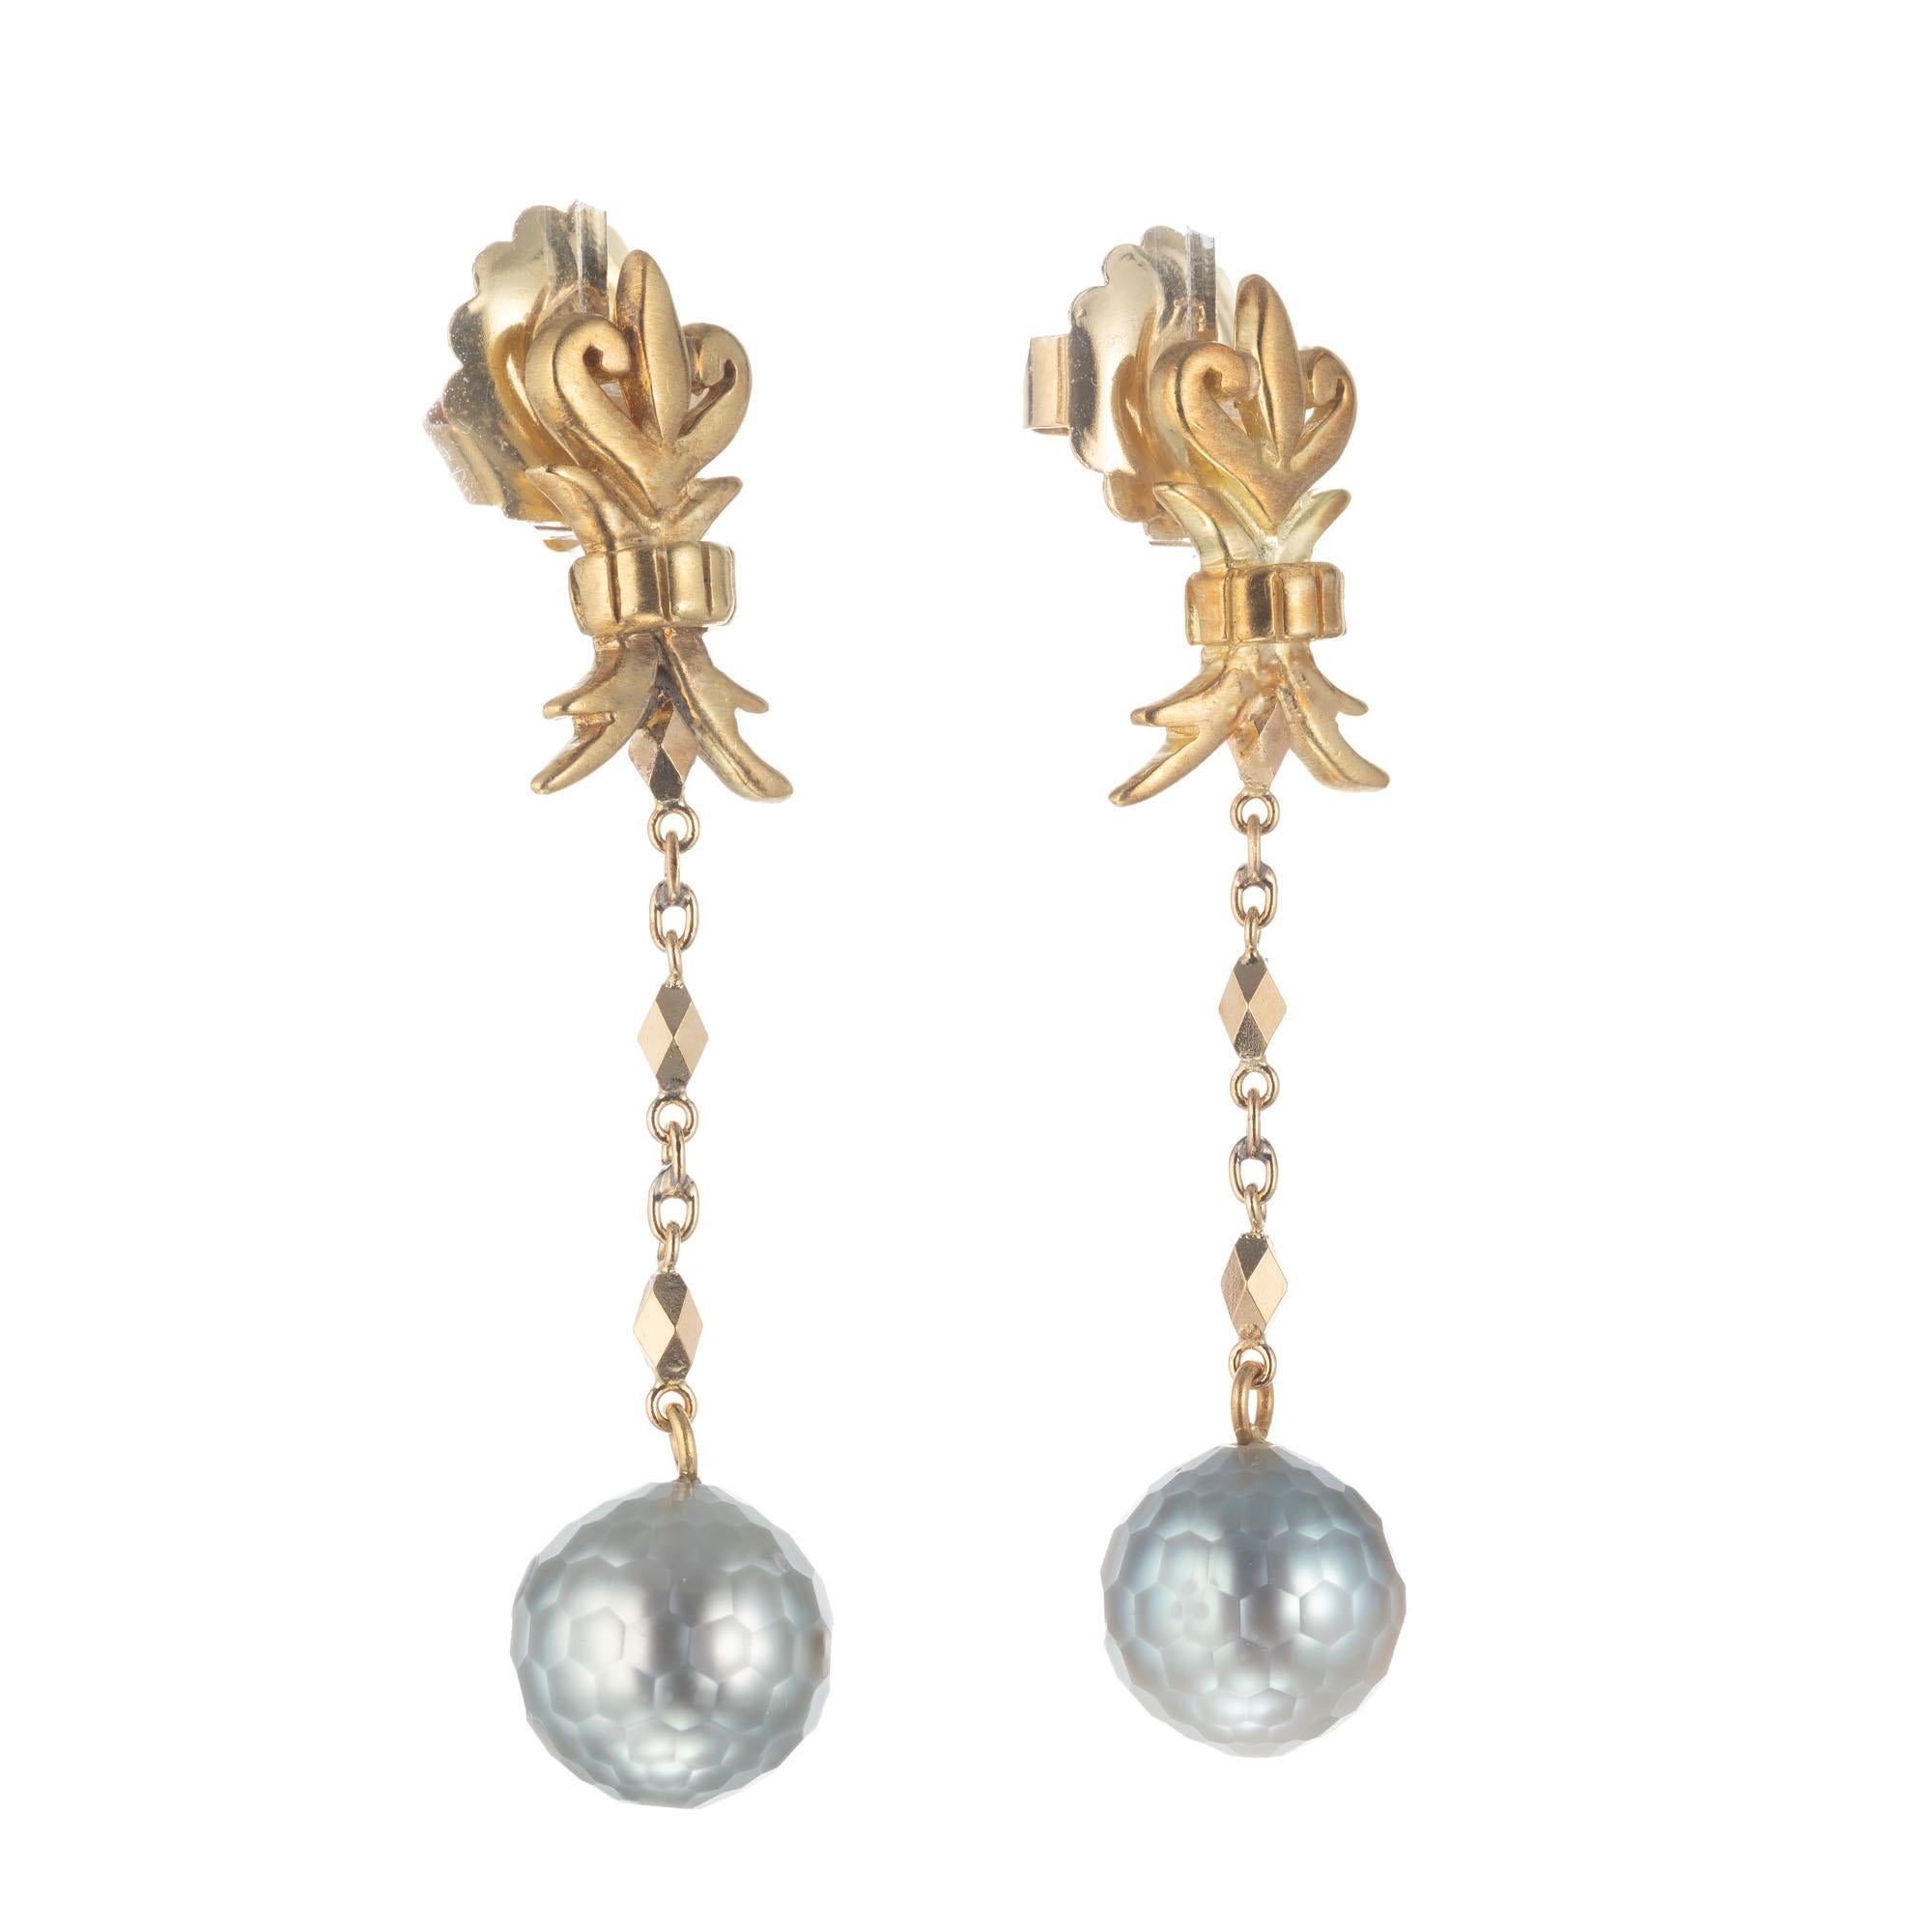 Robin Rotenier 18k yellow gold Pearl dangle drop earrings. 2 round grey 9mm pearls. 

2 round grey pearls 9mm
18k yellow gold
Length: 43.75mm or 1.72 inches
Weight: 7 grams